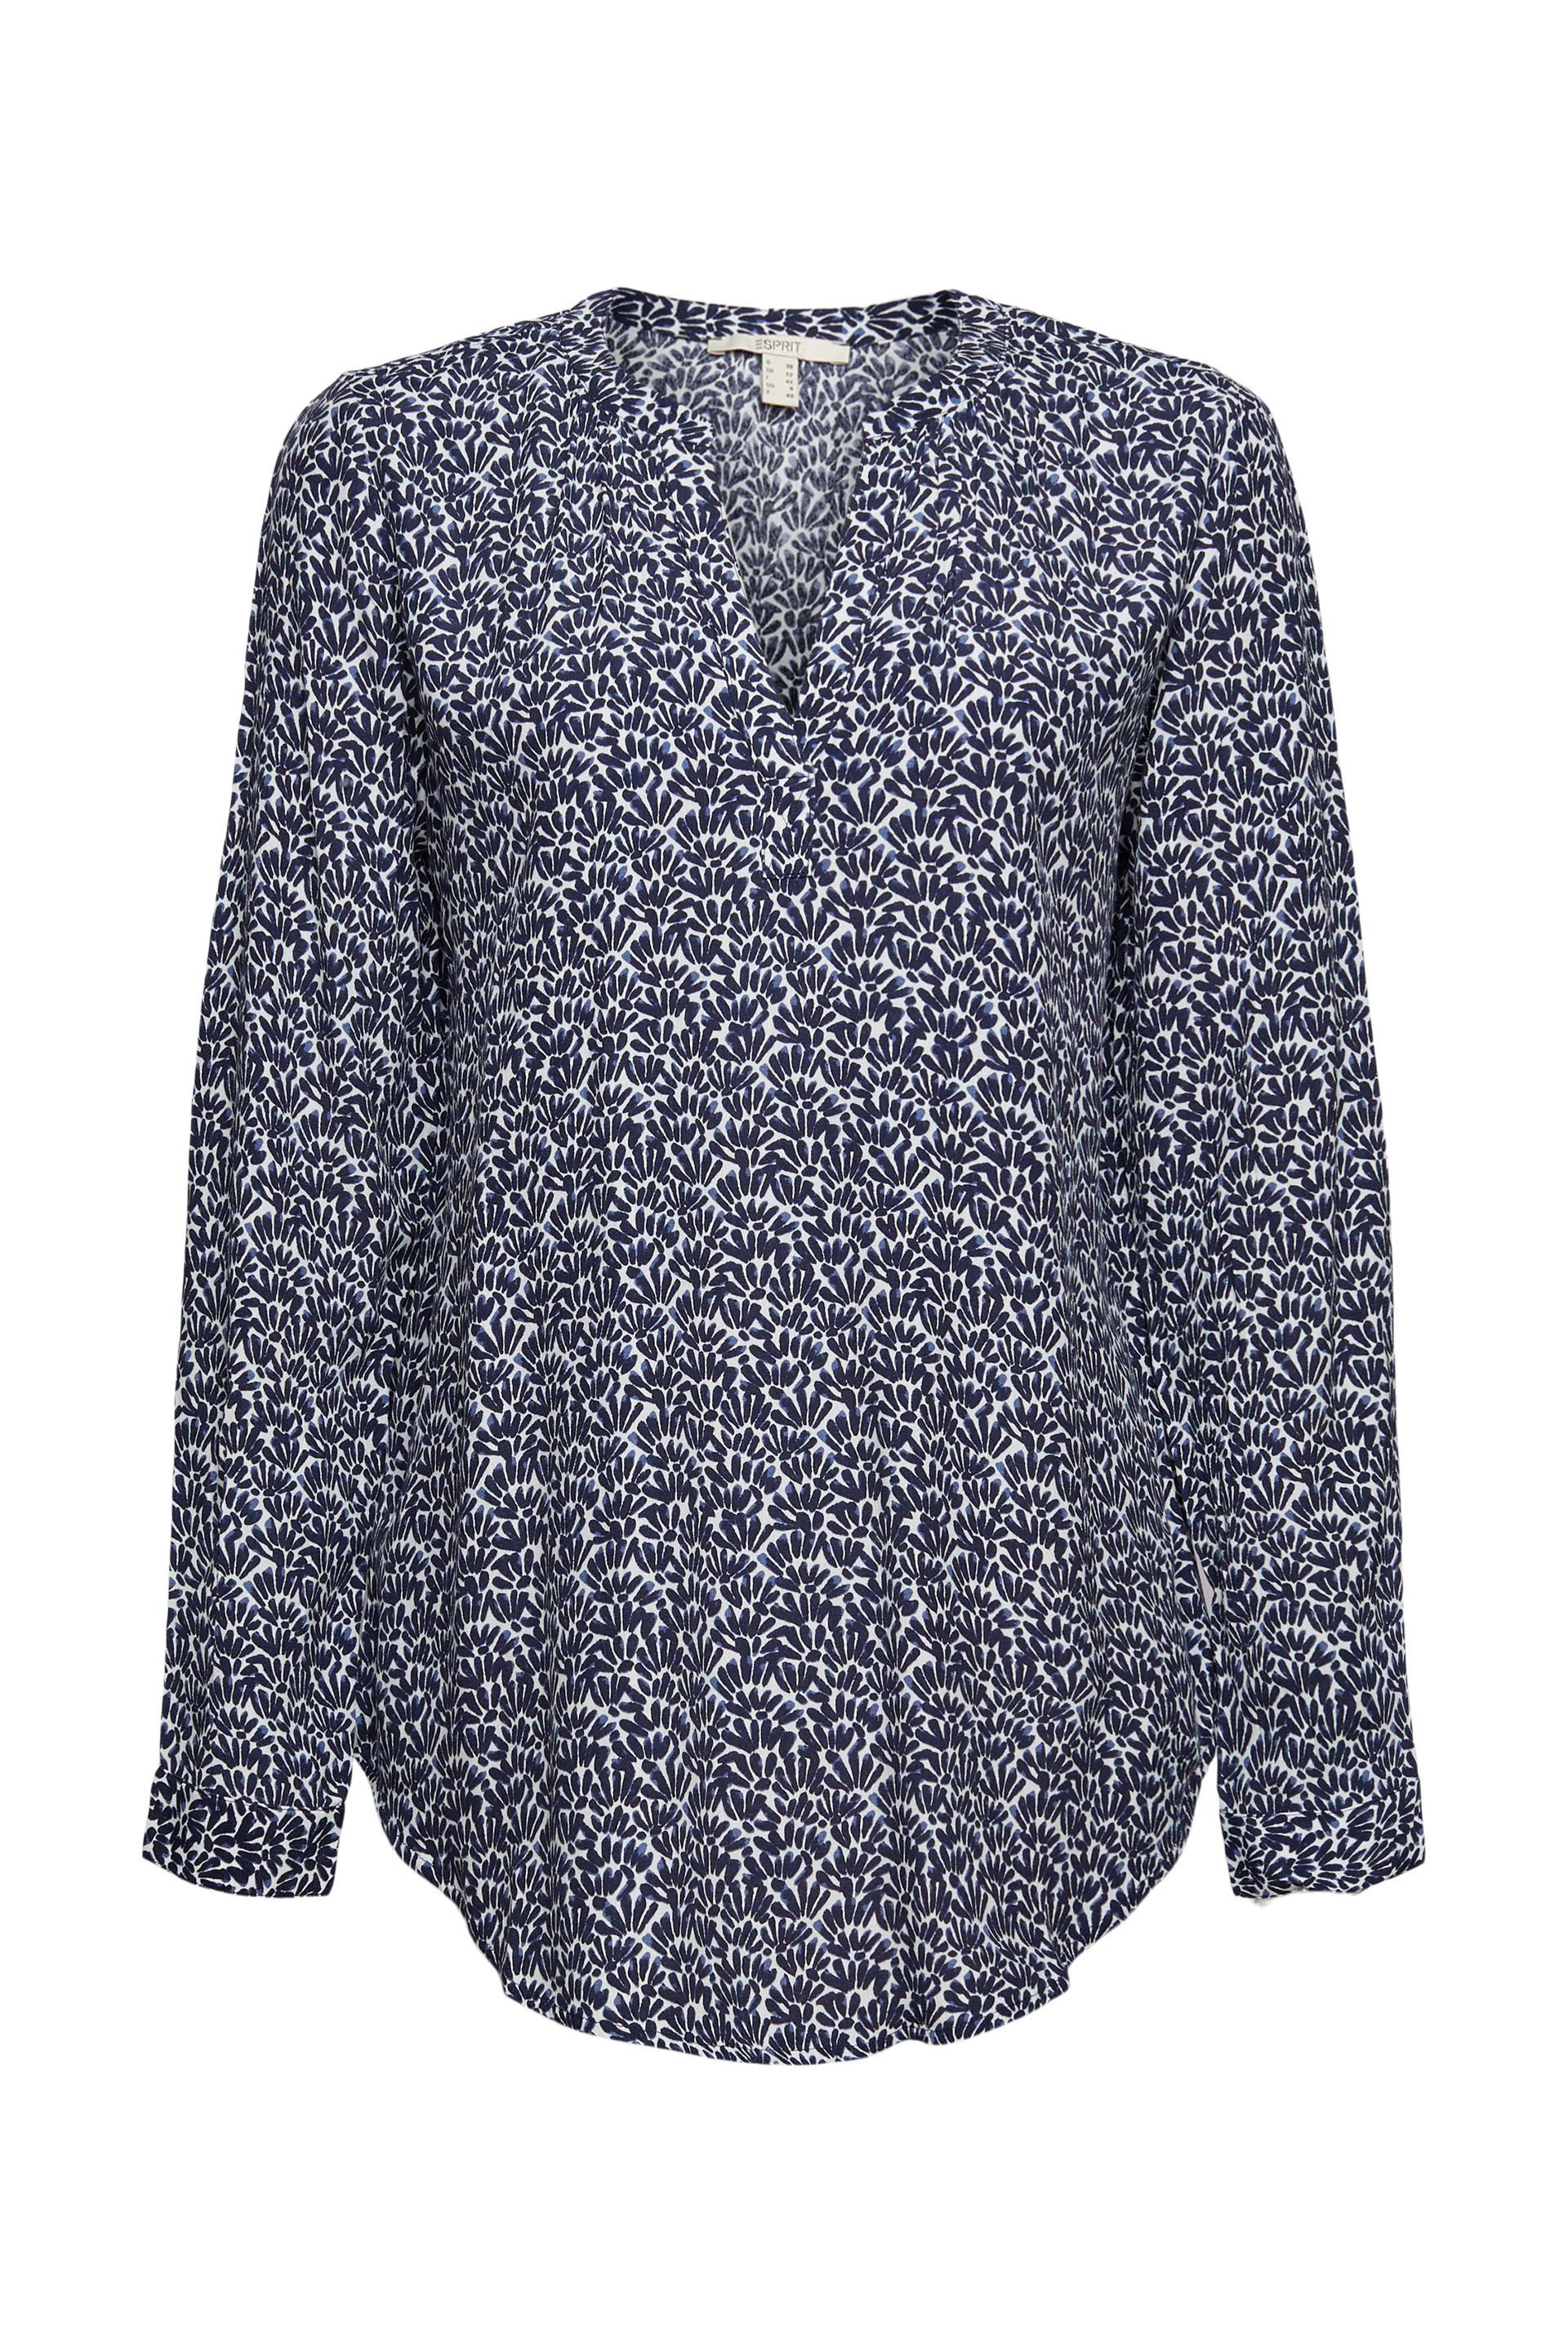 Blouse with pattern, Blue, large image number 0